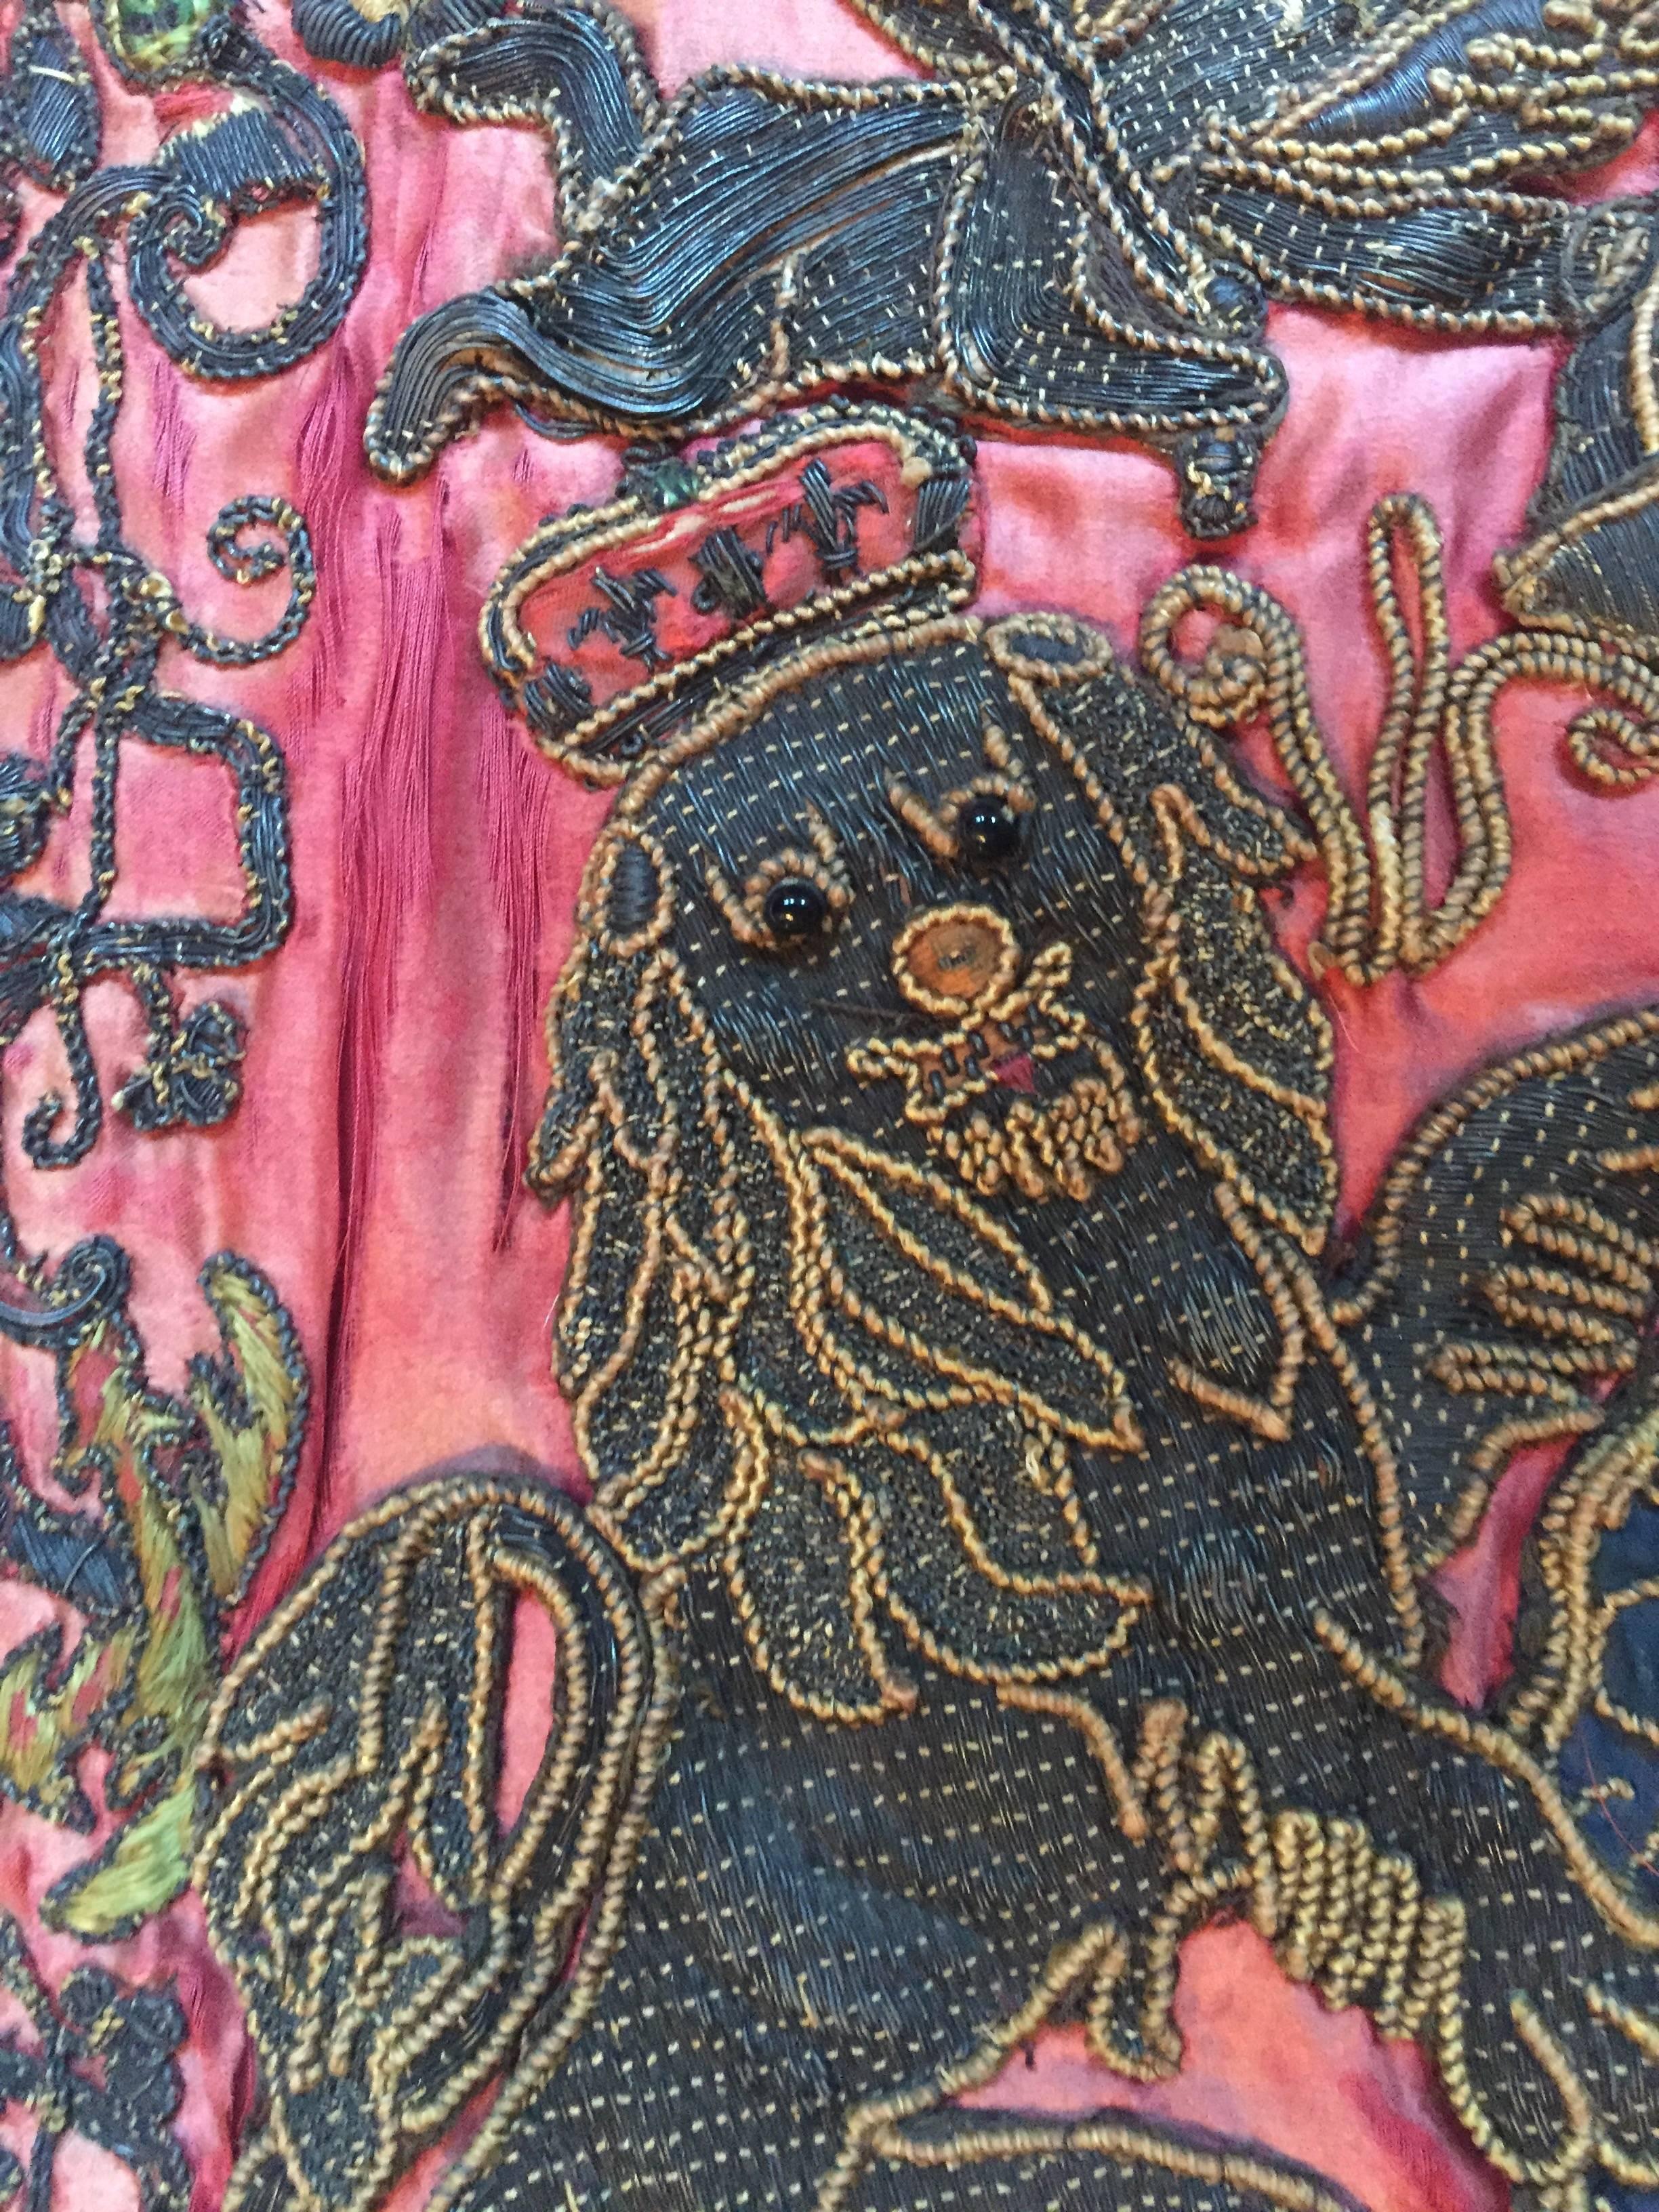 Another great survivor of History, this trumpet banner has gold and silver thread embroidery on Crimson Damask silk depicting the Hanover Royal Arms, flanked by the initials 